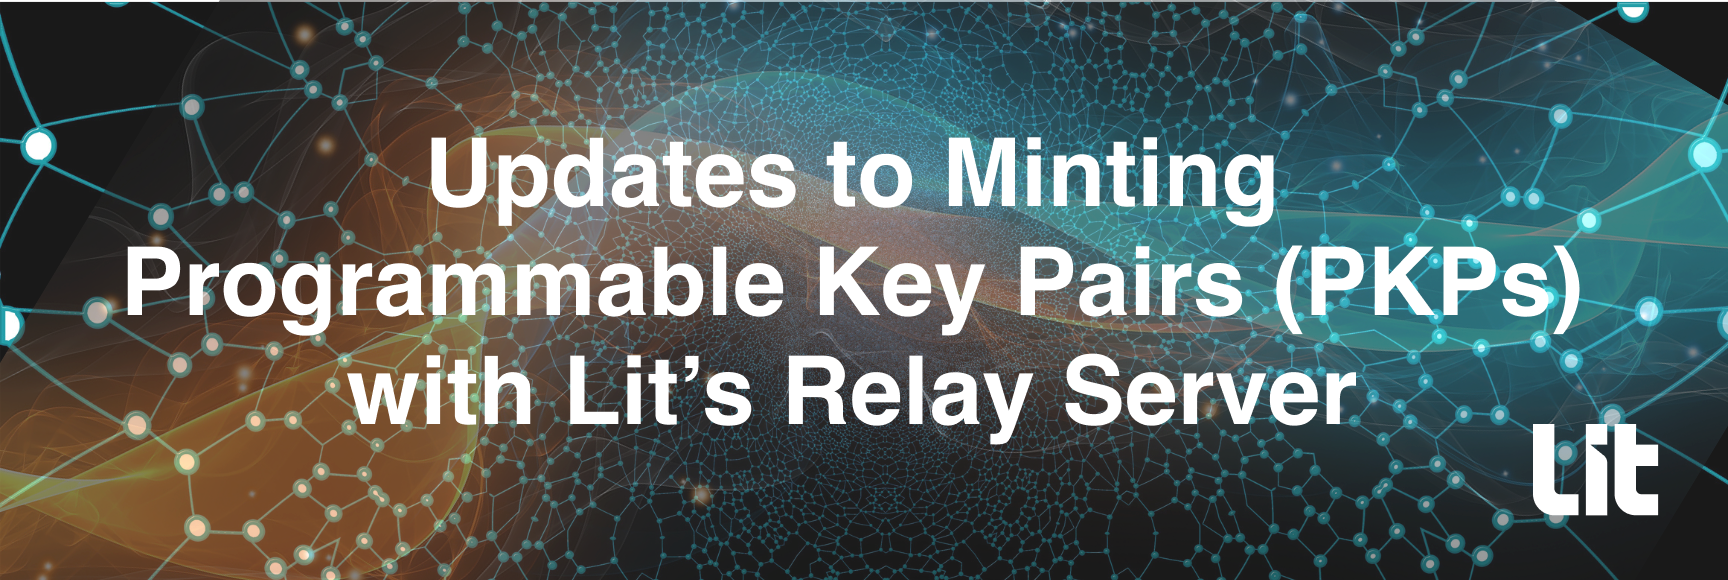 Updates to Minting Programmable Key Pairs (PKPs) with Lit’s Relay Server